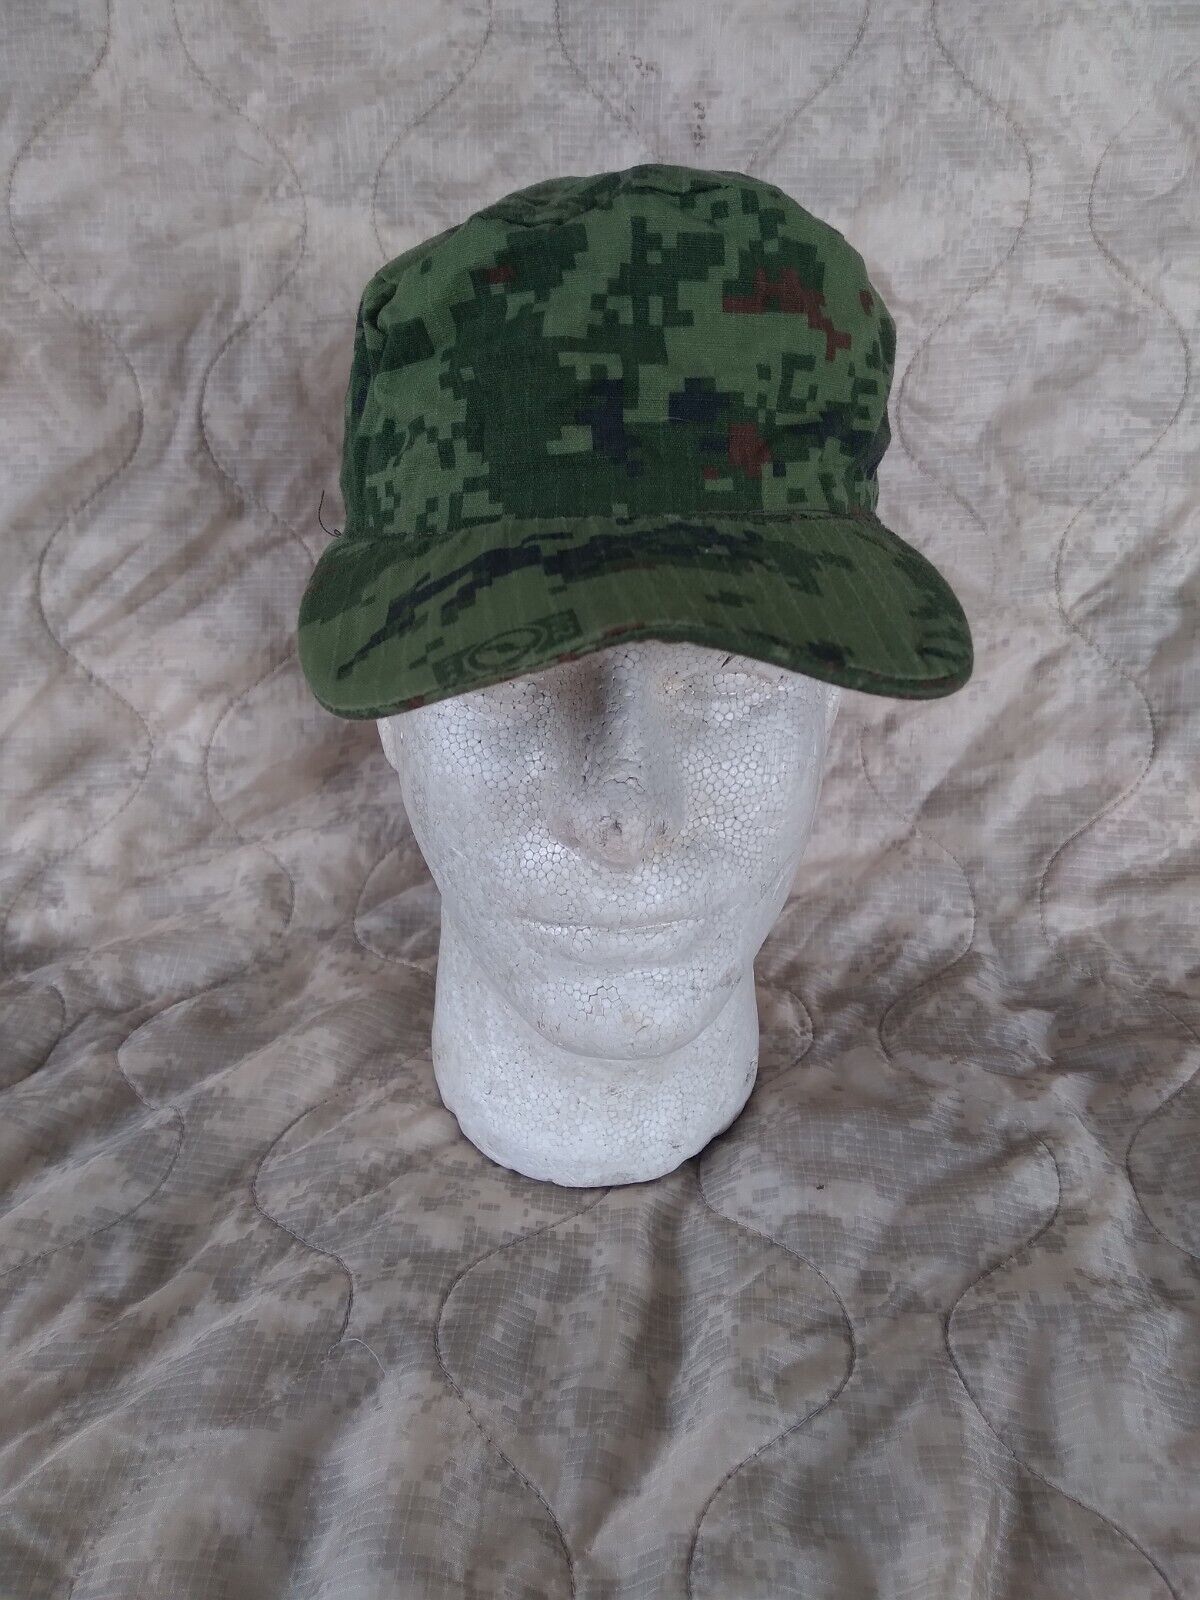 Mexican Army War on Drugs Digital Camo Field Cap. Size 55, Rare